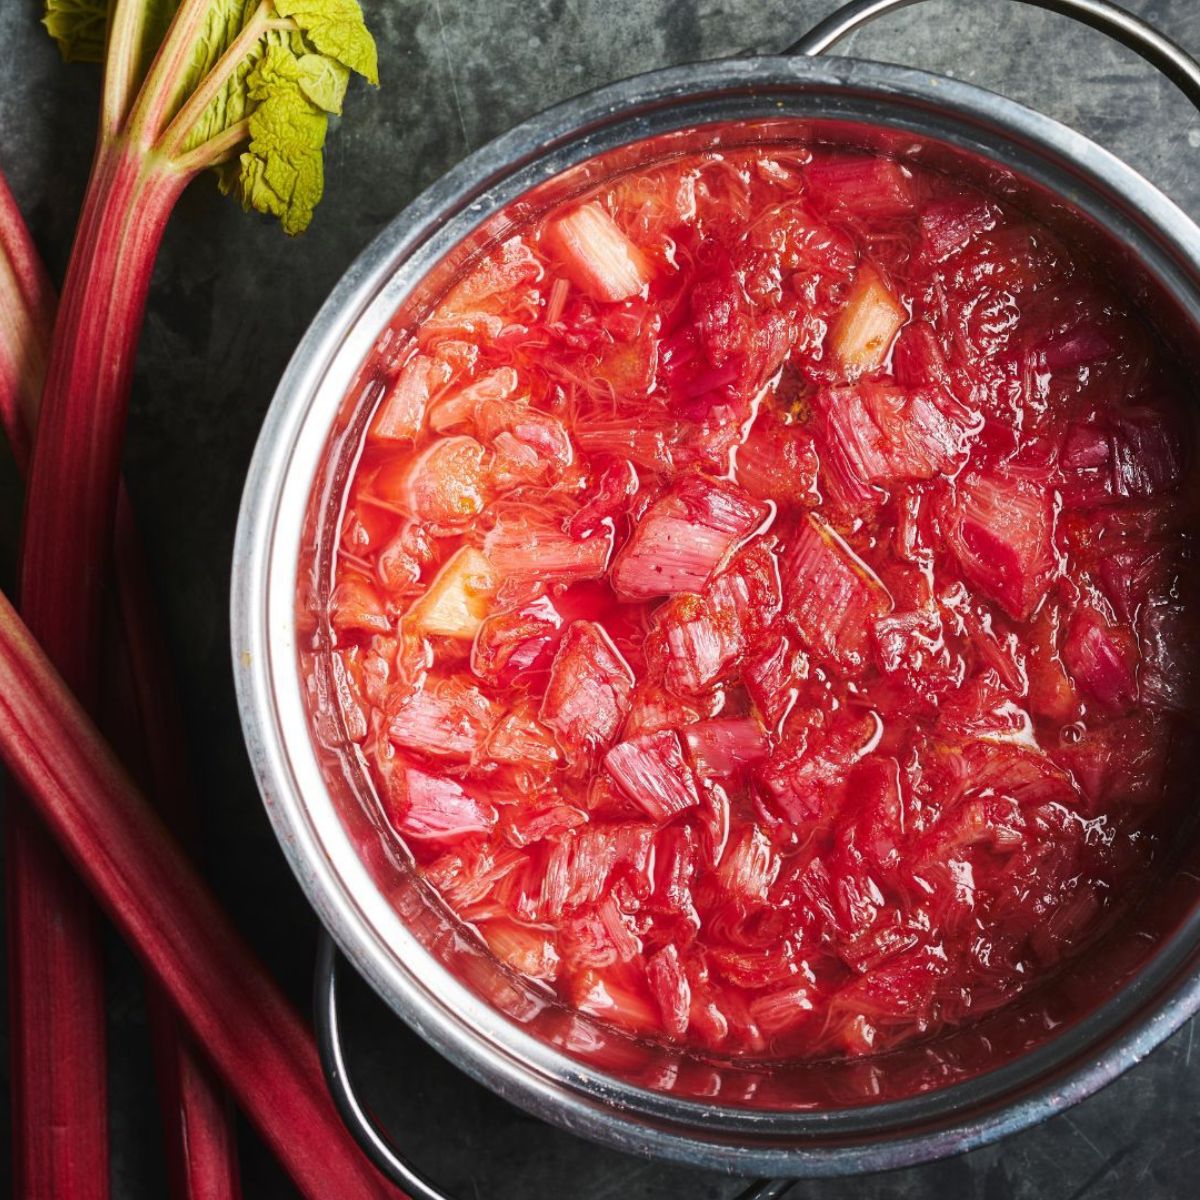 Stewed rhubarb in stainless steel pot with rhubarb stalks on the side.